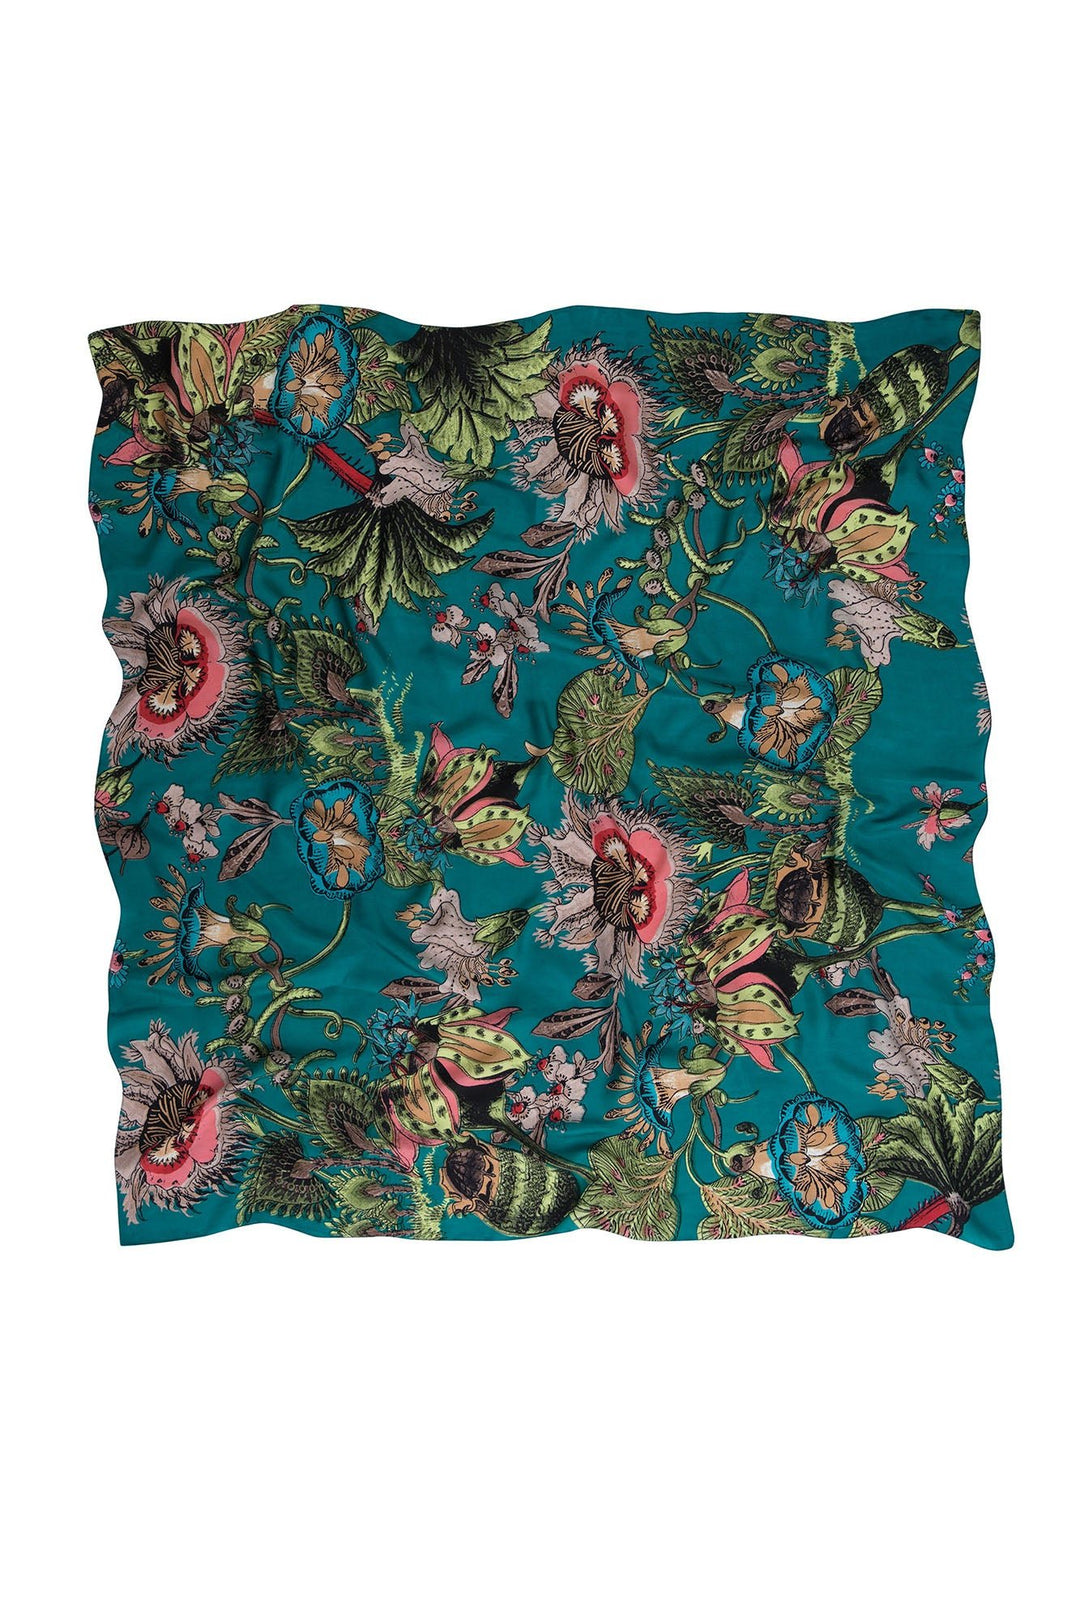 Eccentric Blooms Teal Silk Scarf - One Hundred Stars